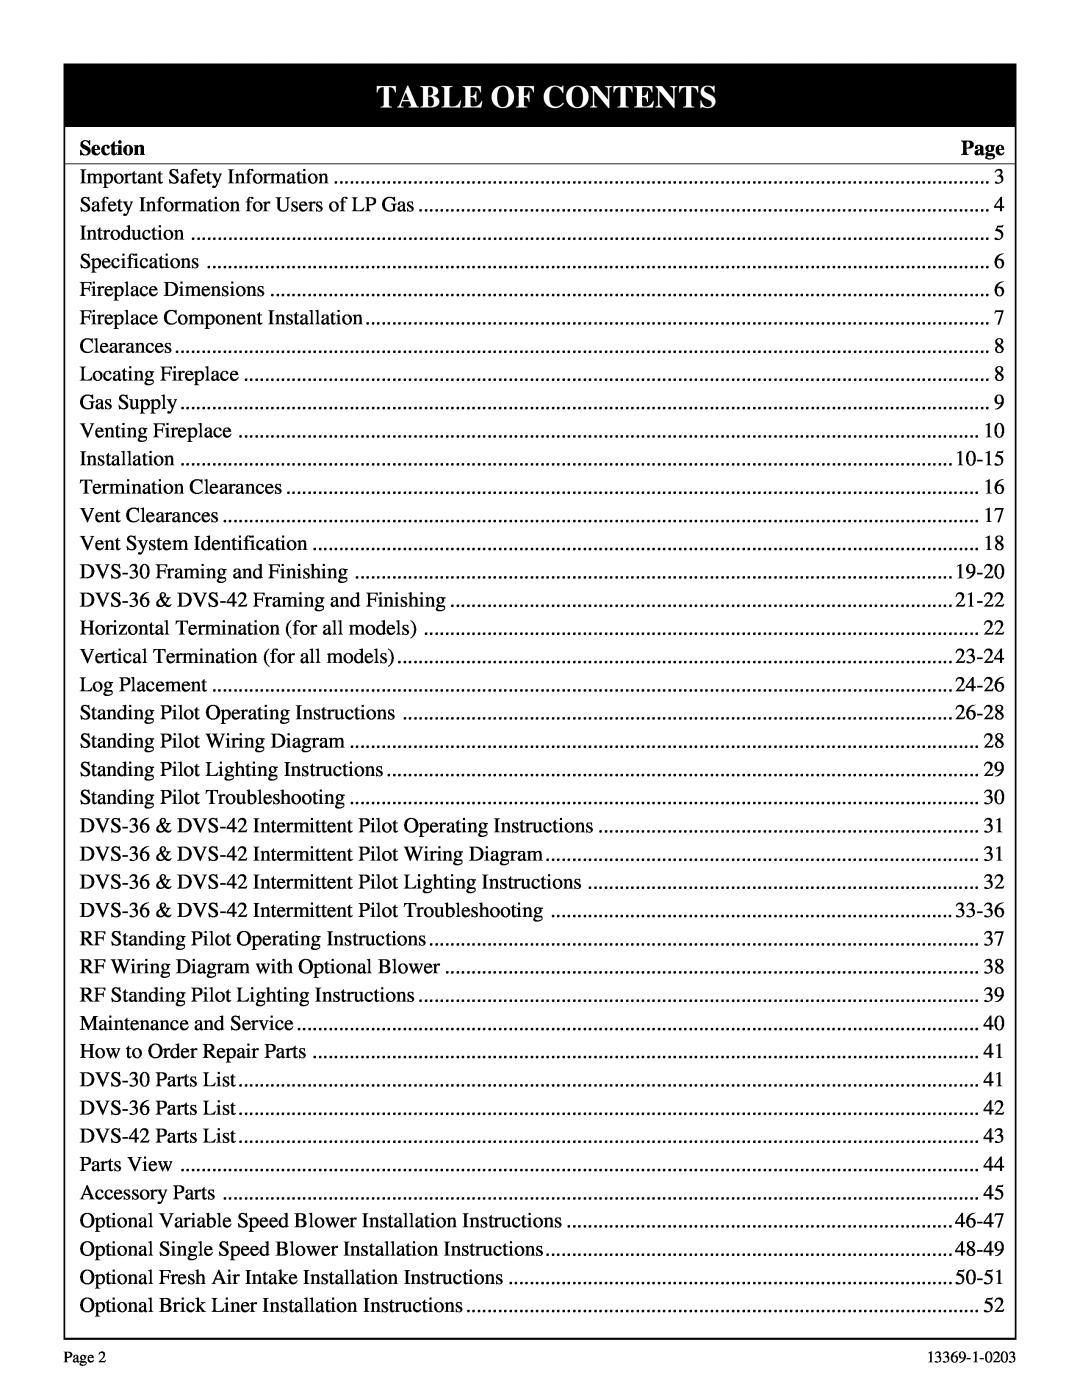 DVS 30-2 installation instructions Table Of Contents, Section, Page 